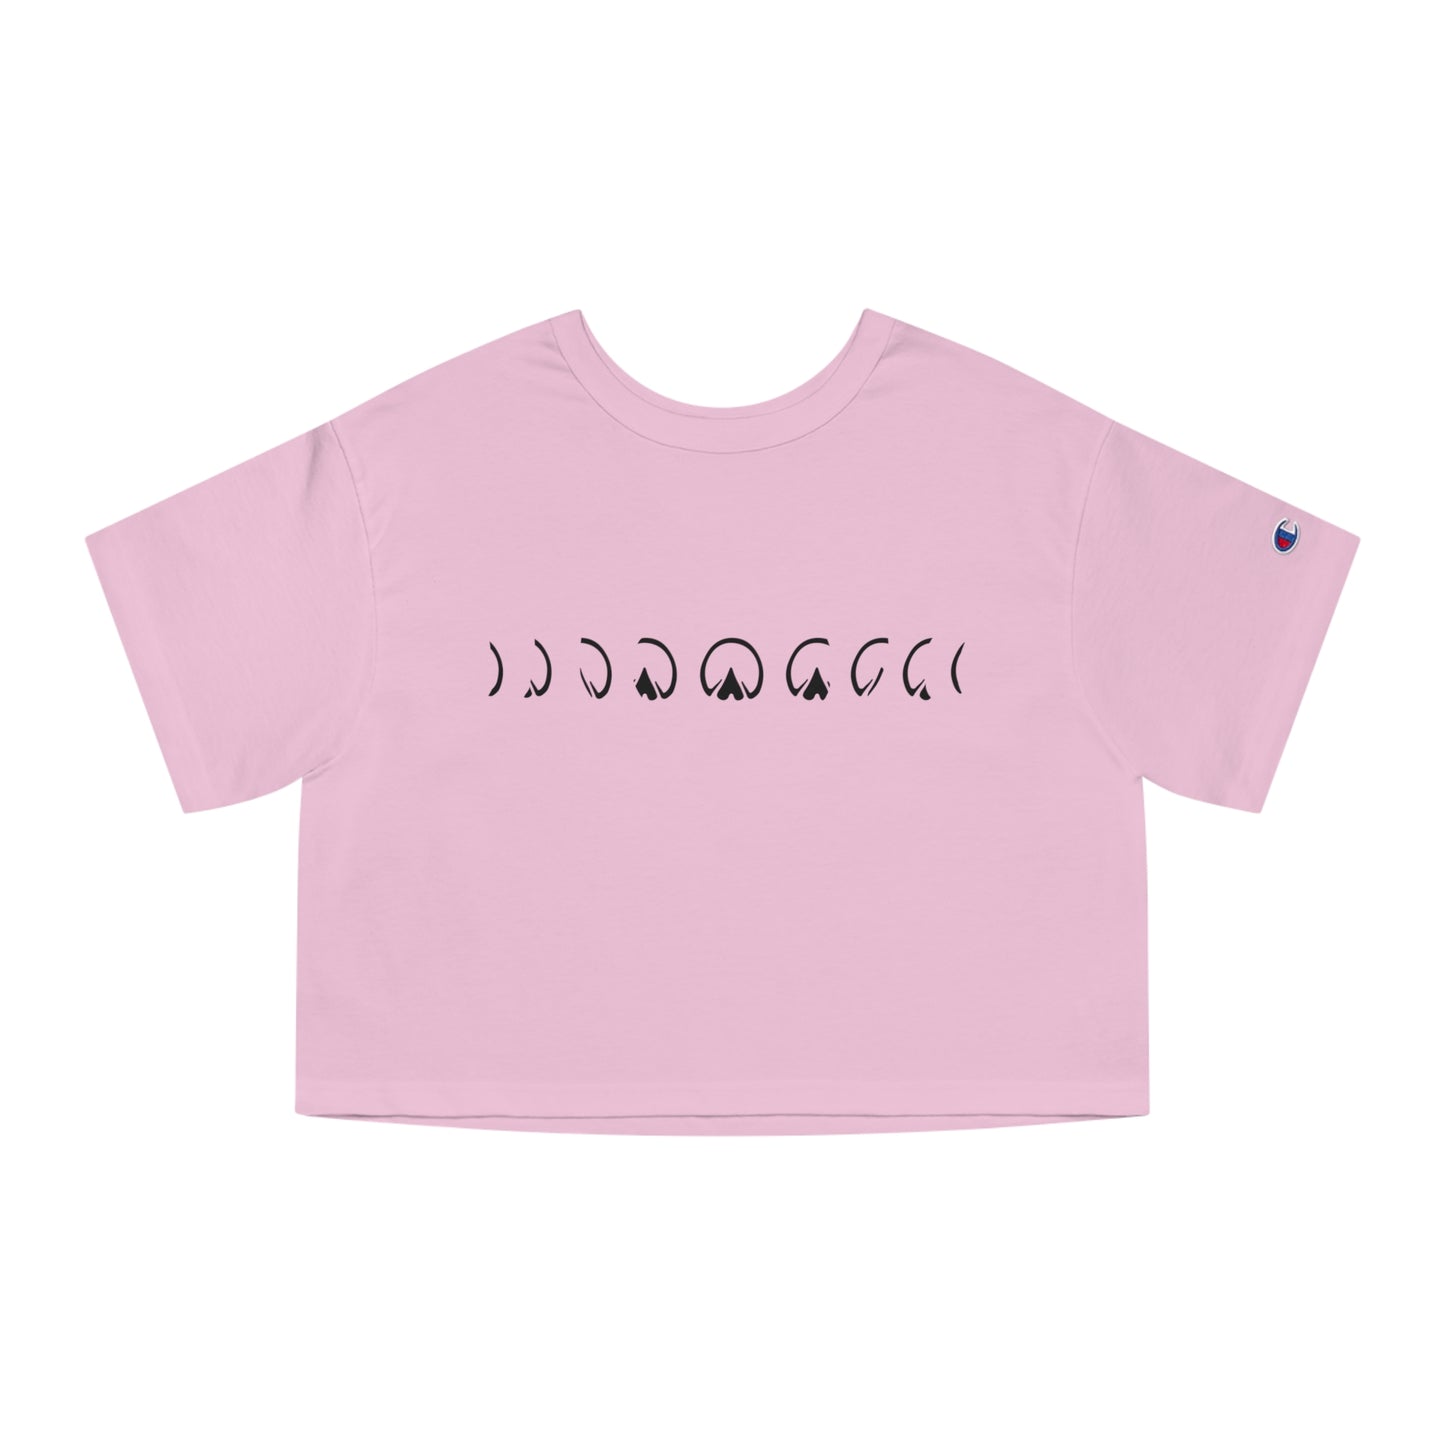 Barefoot Moon Phases Crop Top